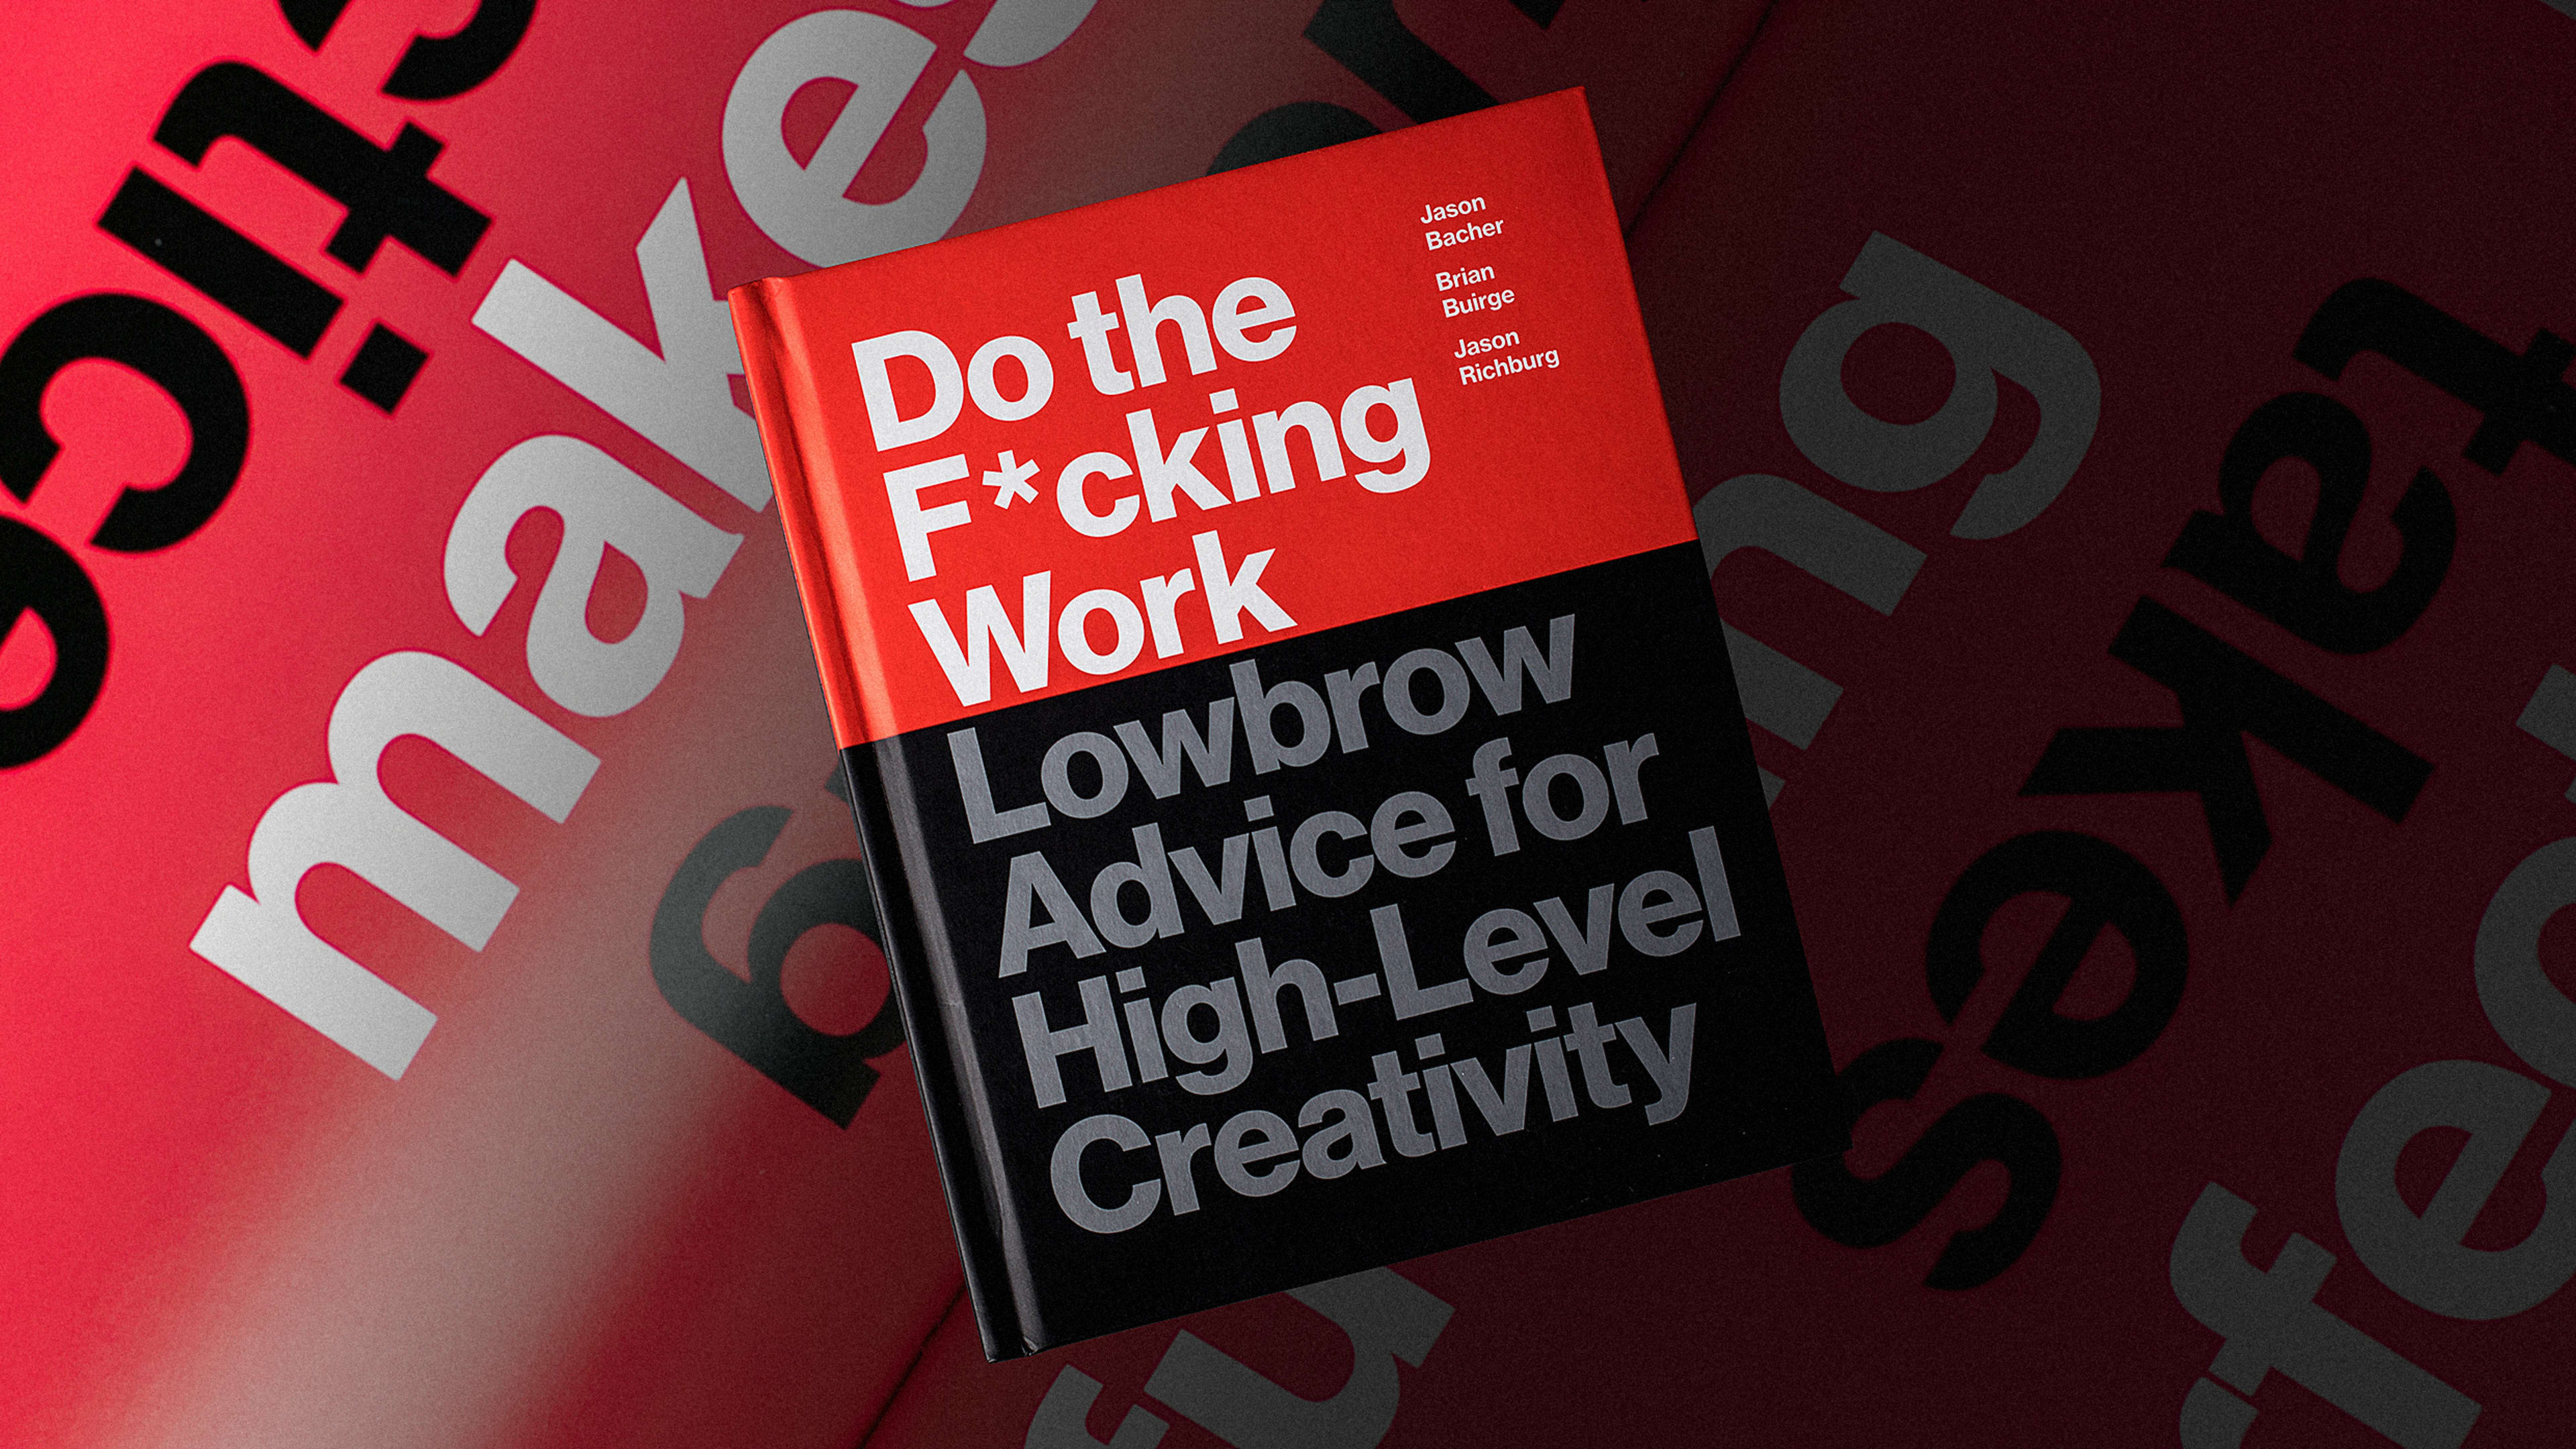 Gave up on your New Year’s resolutions? Recharge your creativity with this no-nonsense advice